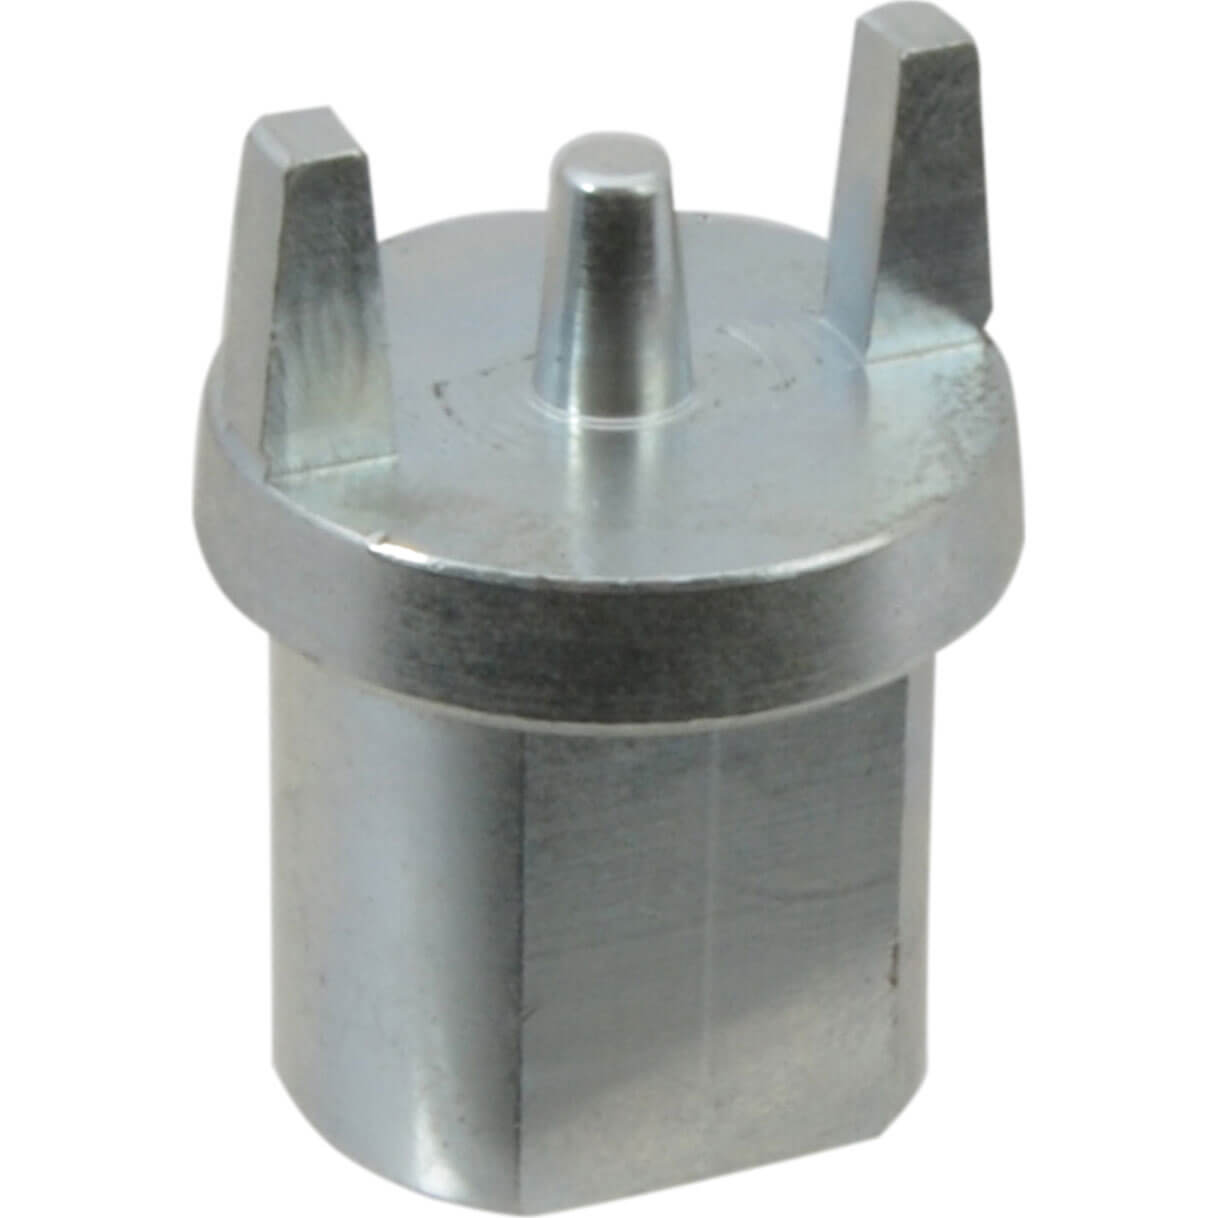 Image of Monument 4527C Grip+ T6 Three Pin Sink Rose Tool